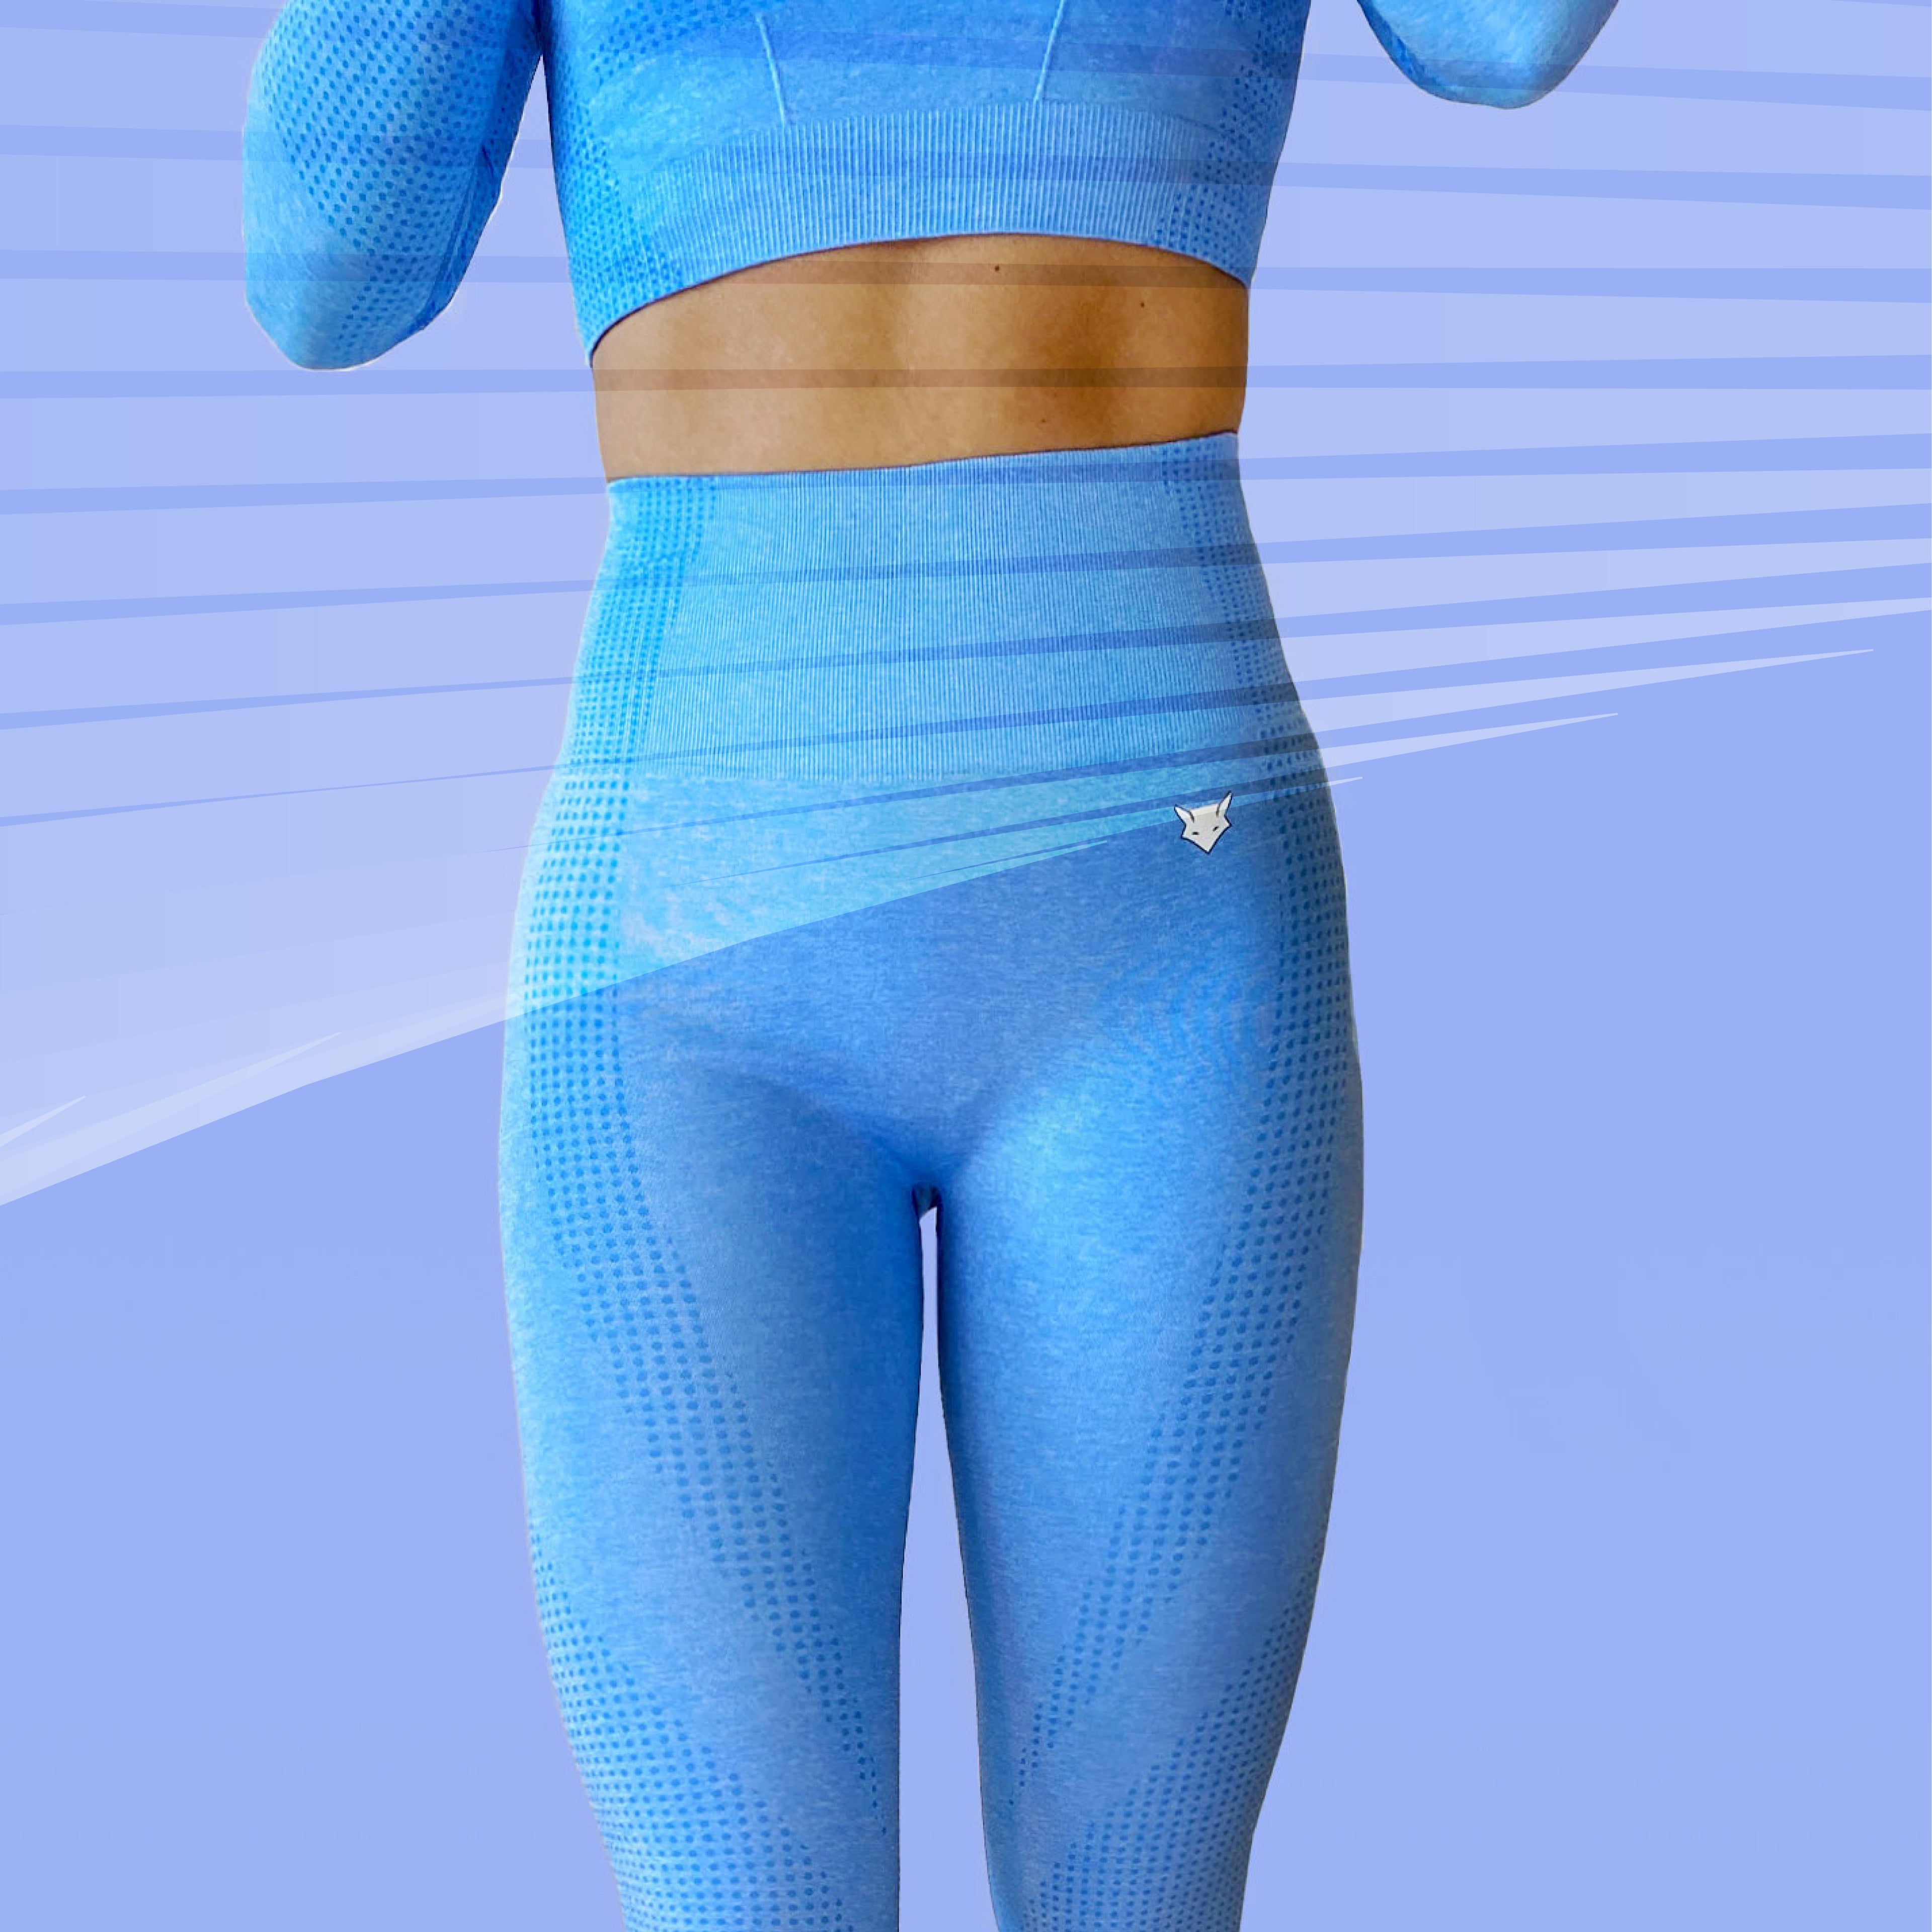 Elite Seamless 3 pieces set - Leggings and Long Sleeve Crop Top in Light Blue. The supportive fabric and seamless silhouettes not only help to perform your best during a workout but even to look stunning in your outfit outside the gym.